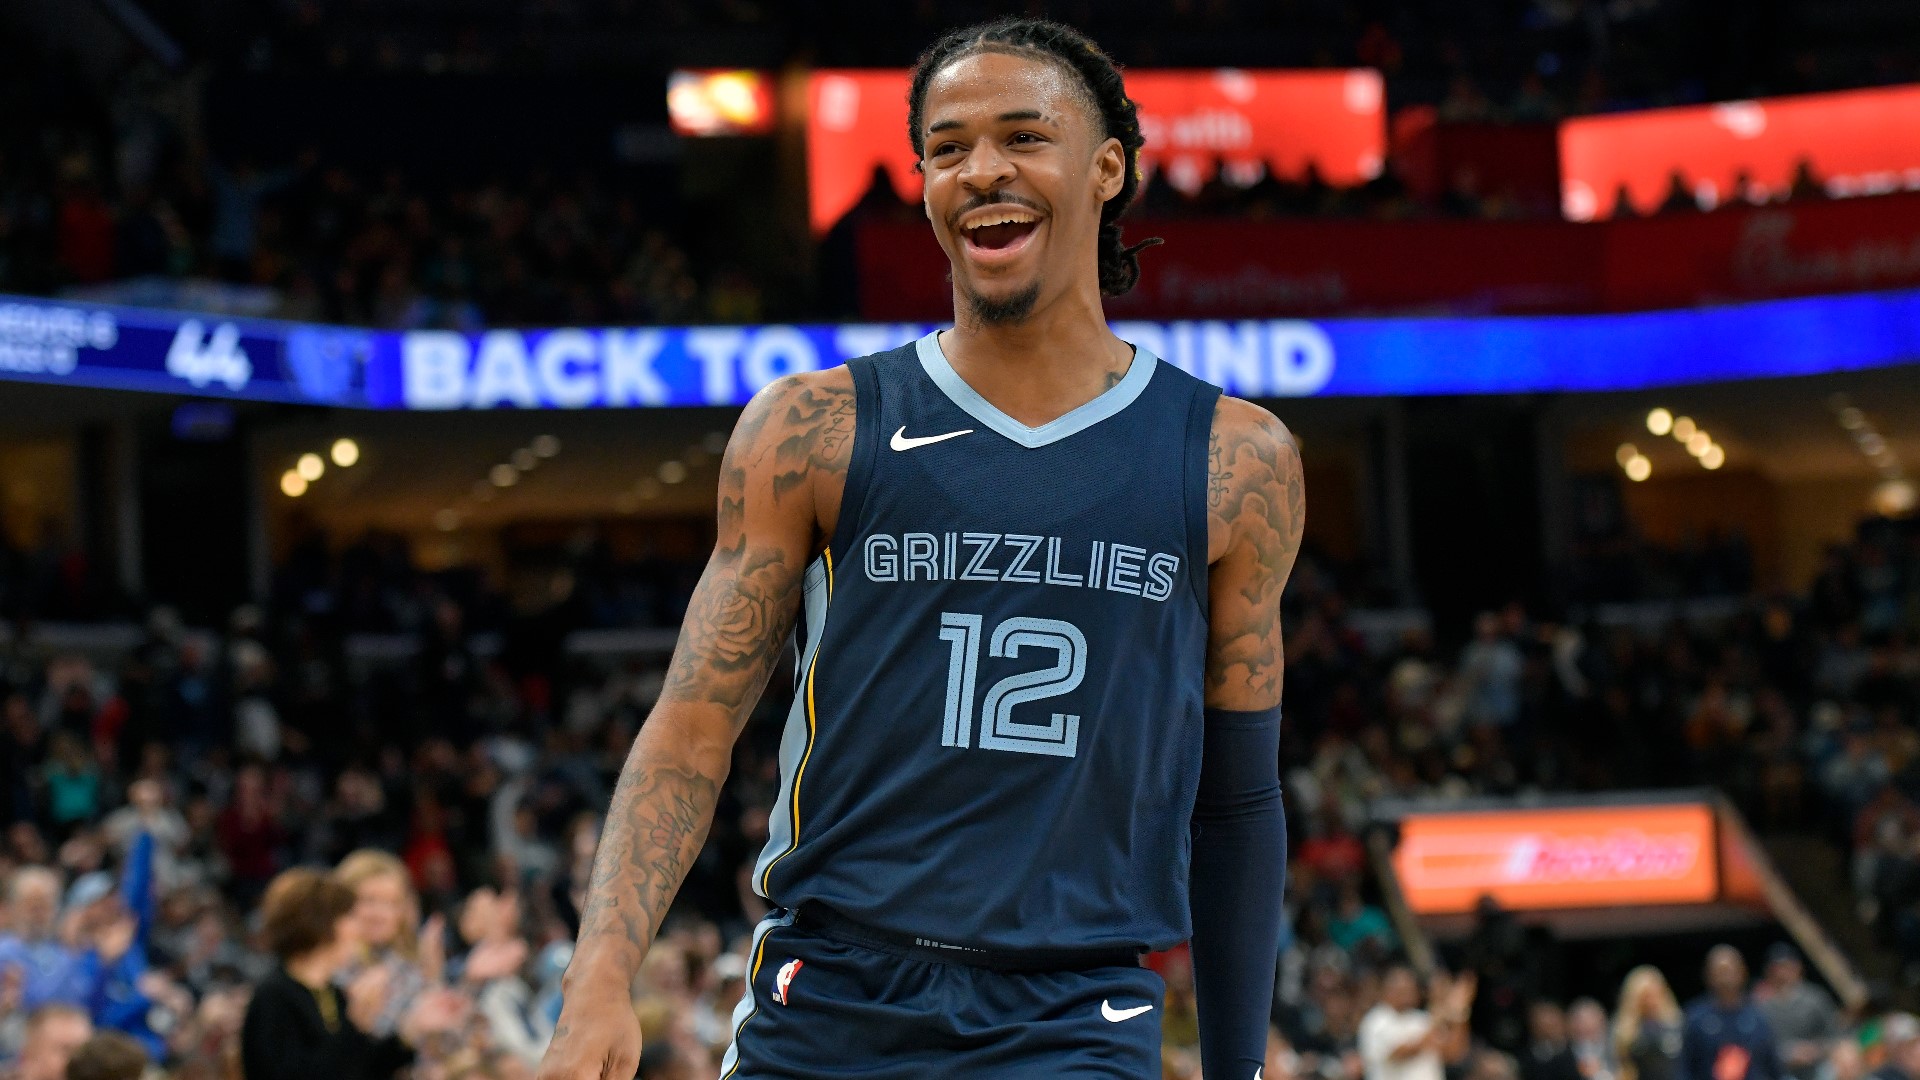 Ja Morant had 20 points, Desmond Bane led all scorers with 31, and Jaren Jackson Jr. added 21 as the Grizzlies beat the Indiana Pacers 116-103.